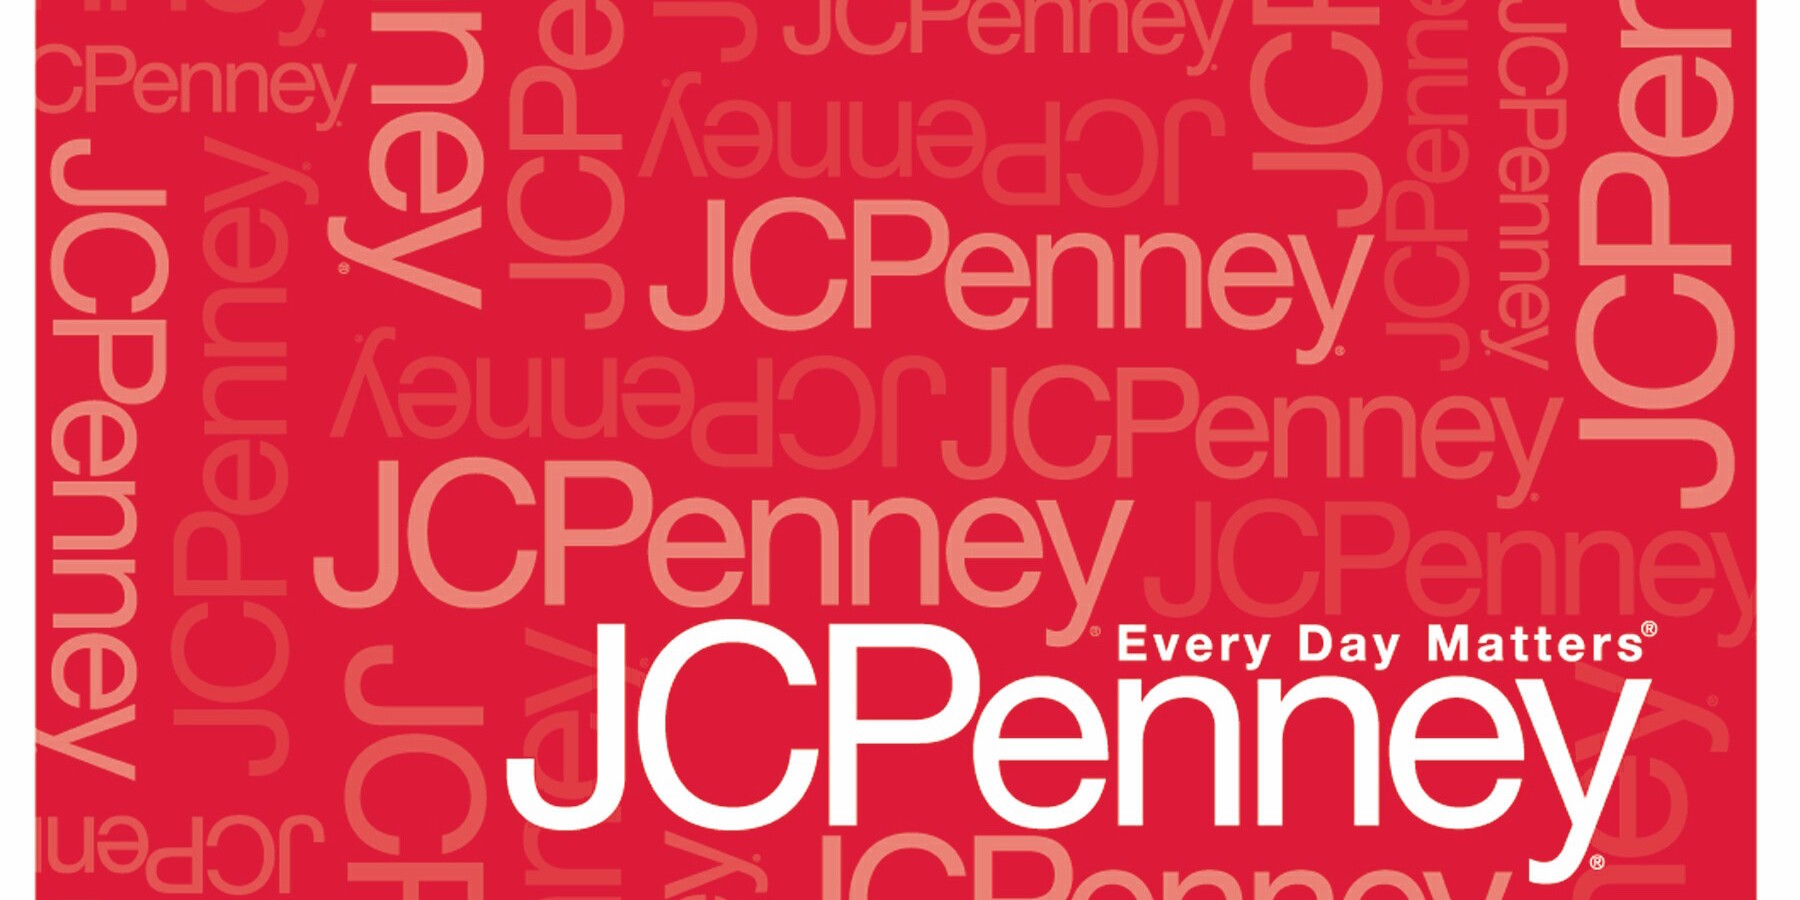 About Rewards - JCPenney